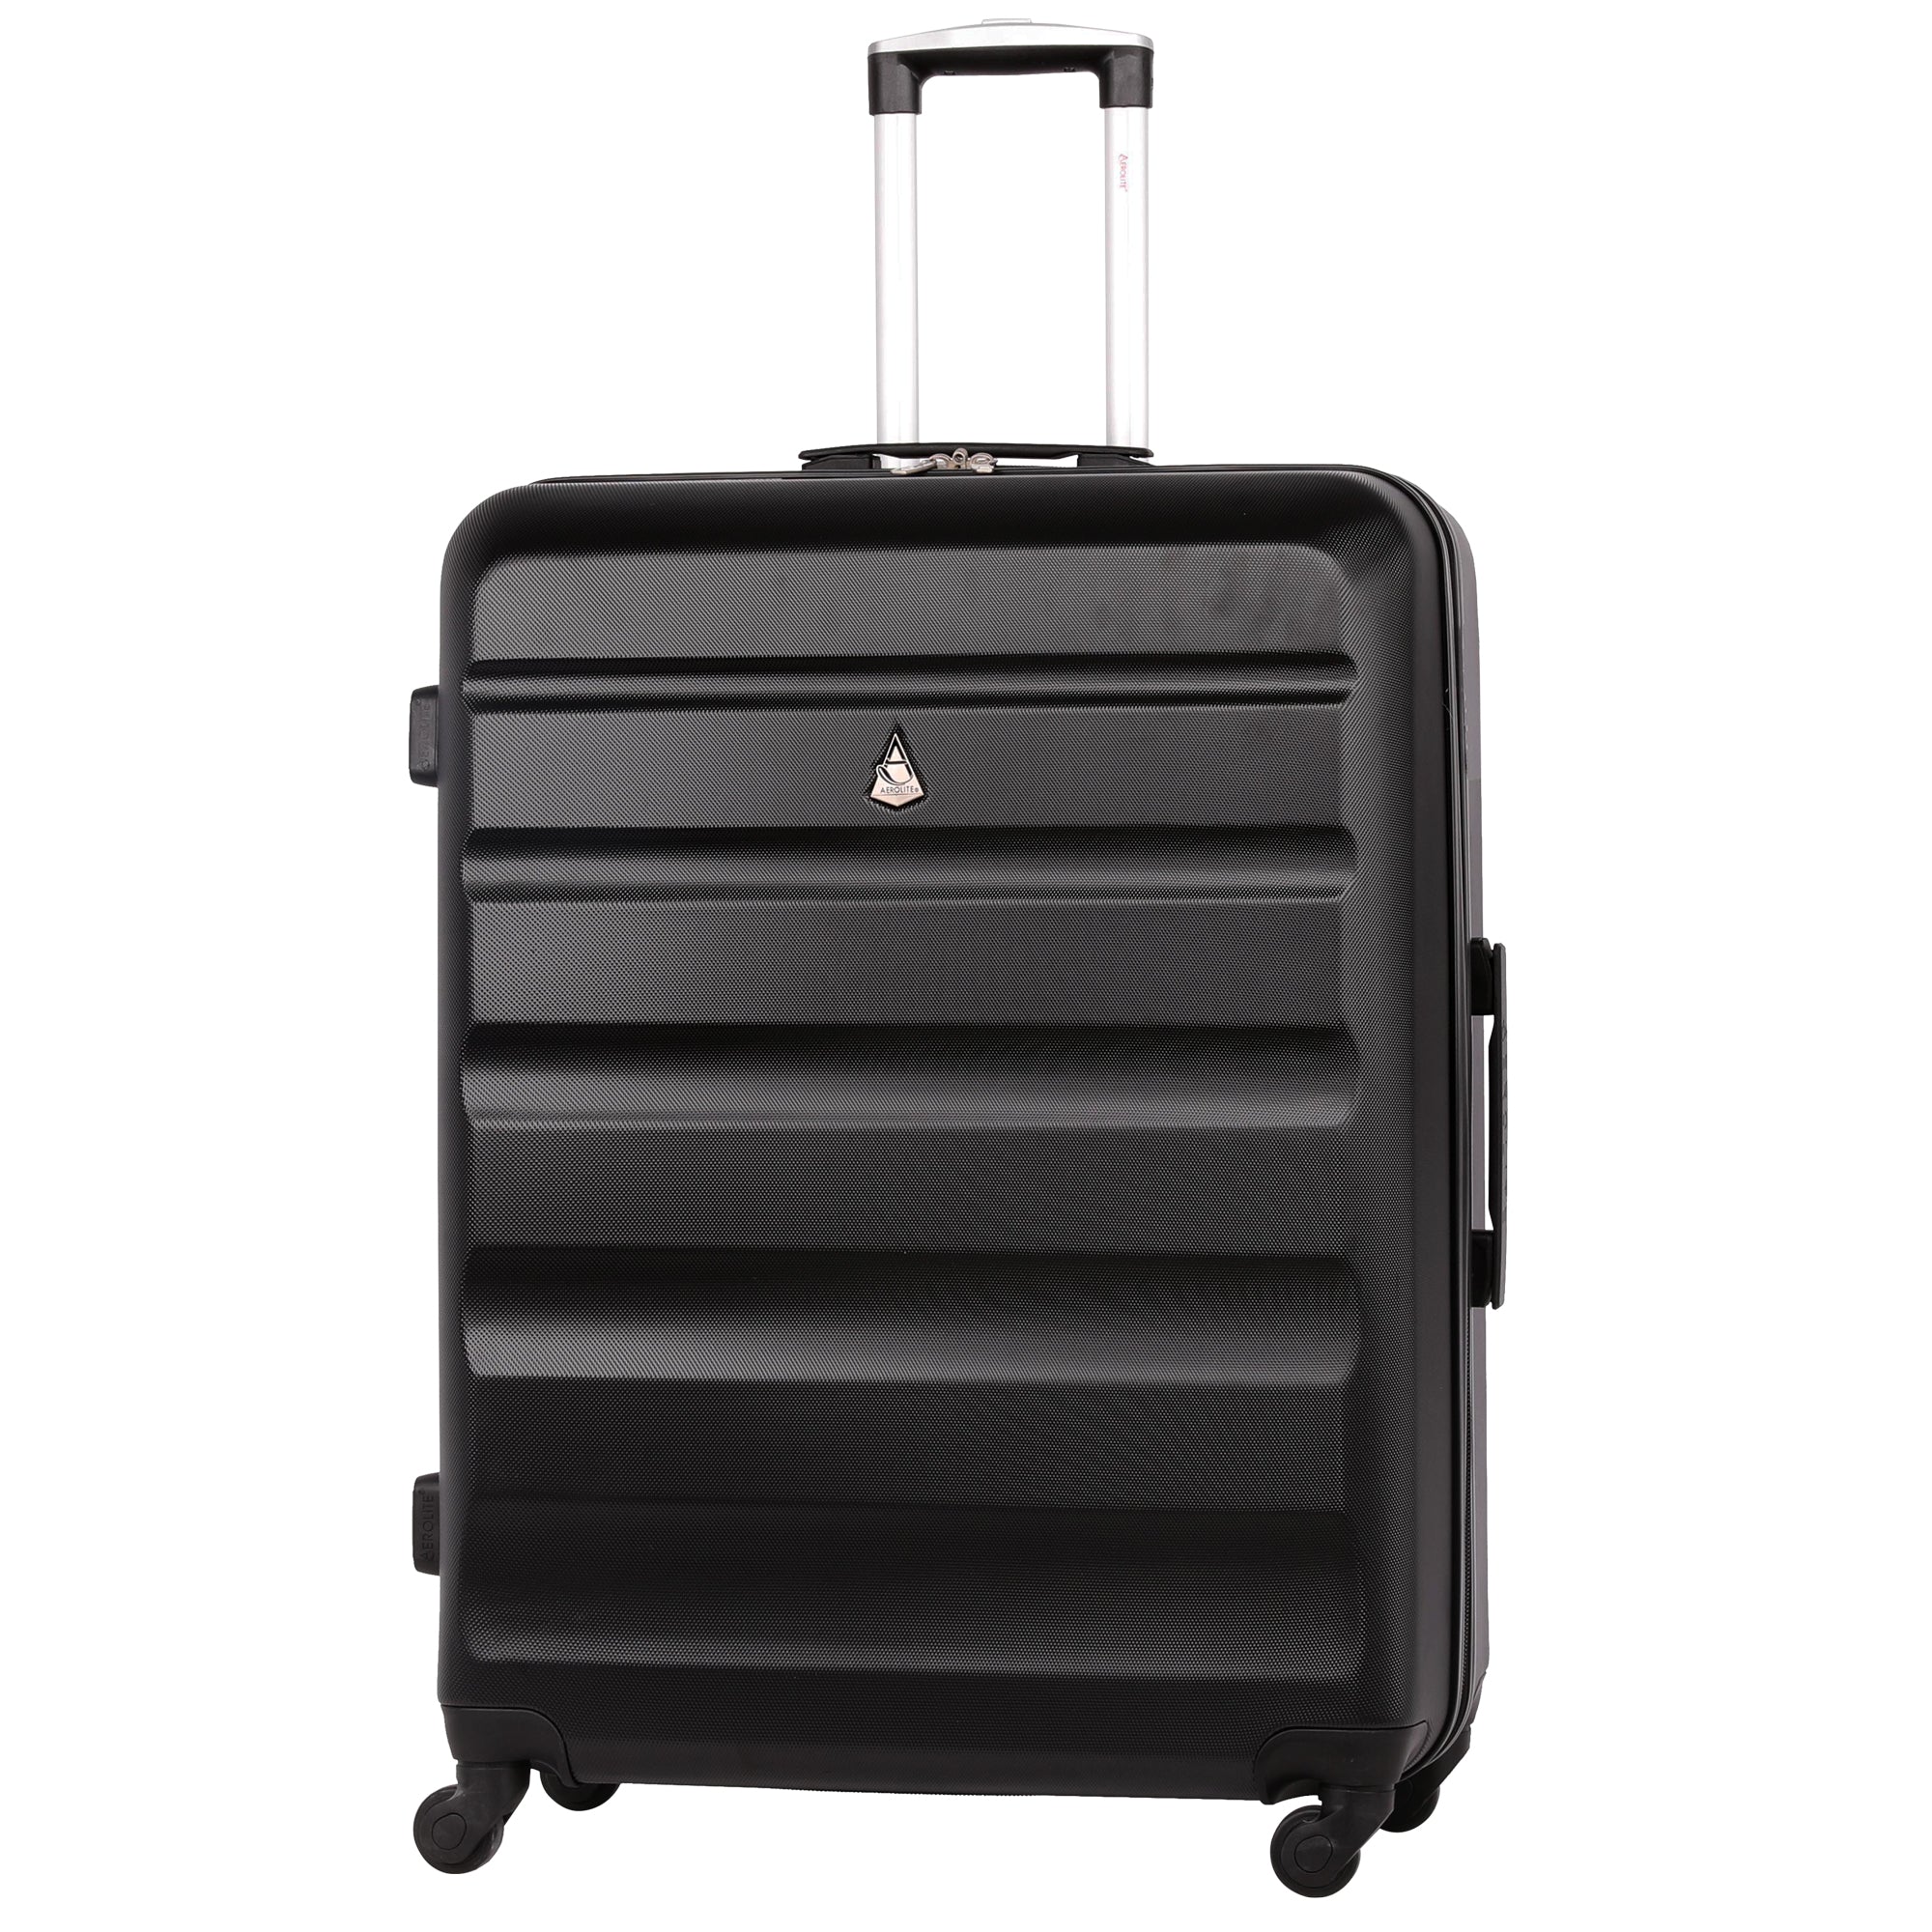 Luggage & Travel Bags | Wheeled Suitcases, Holdalls & More